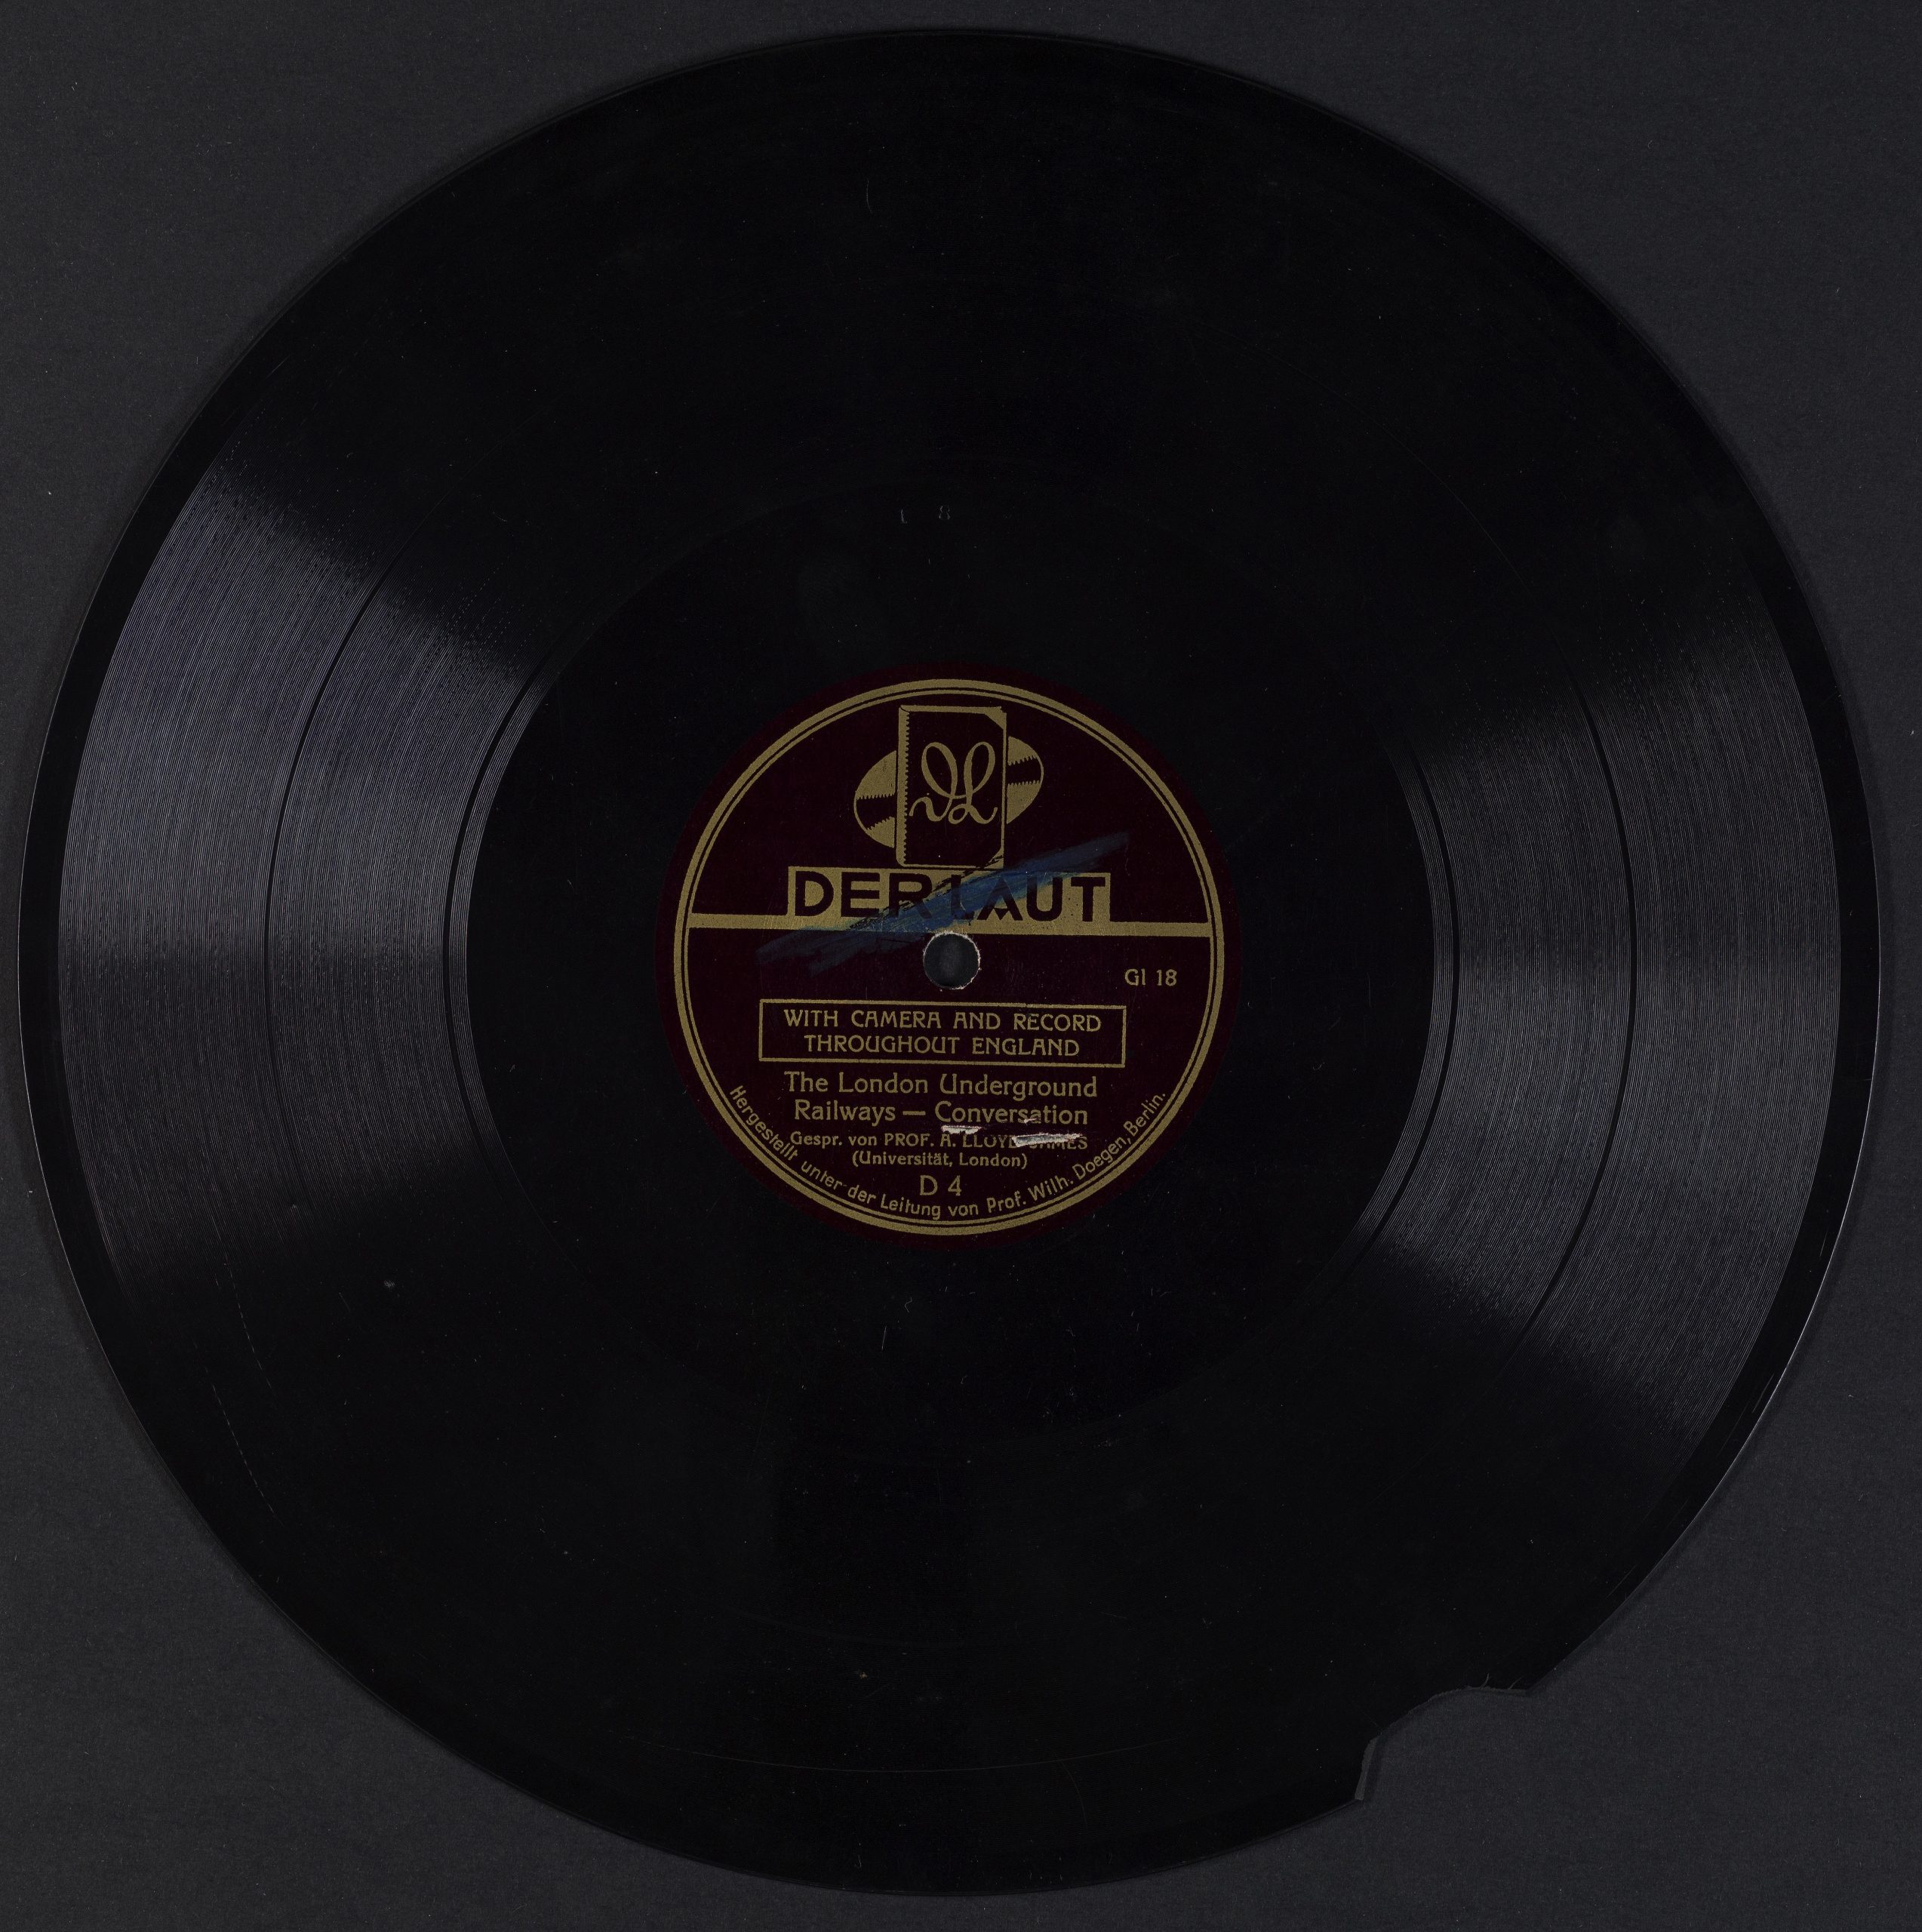 DHM Recording T 98/12 – With Camera and Record, Disc 4, Side A: “The London Underground Railways – Conversation”